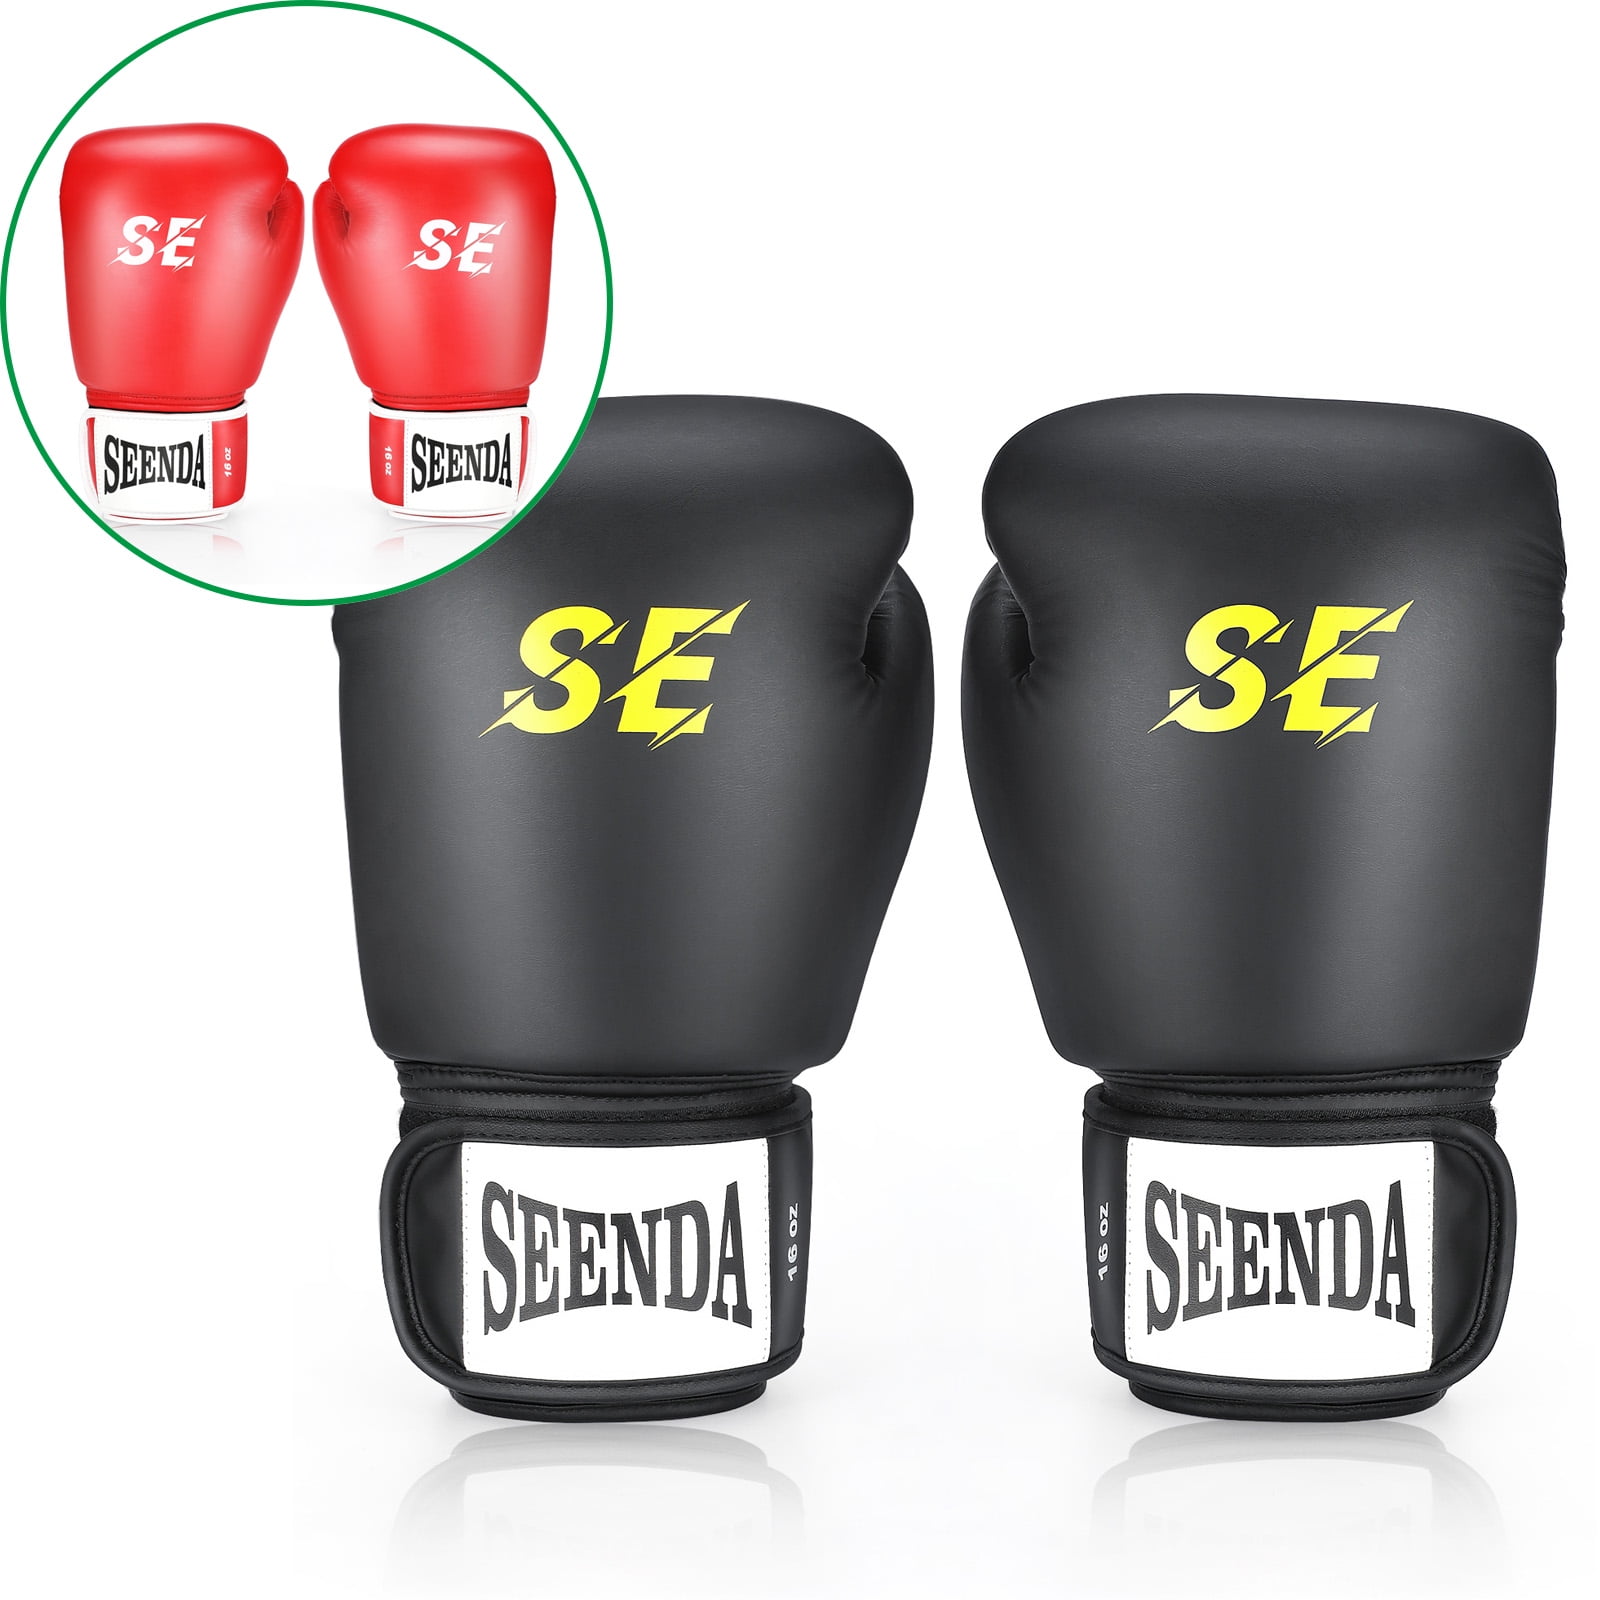 Professional Boxing Sparring Gloves MMA Punch Bag Mitt Fight Training Fighter 